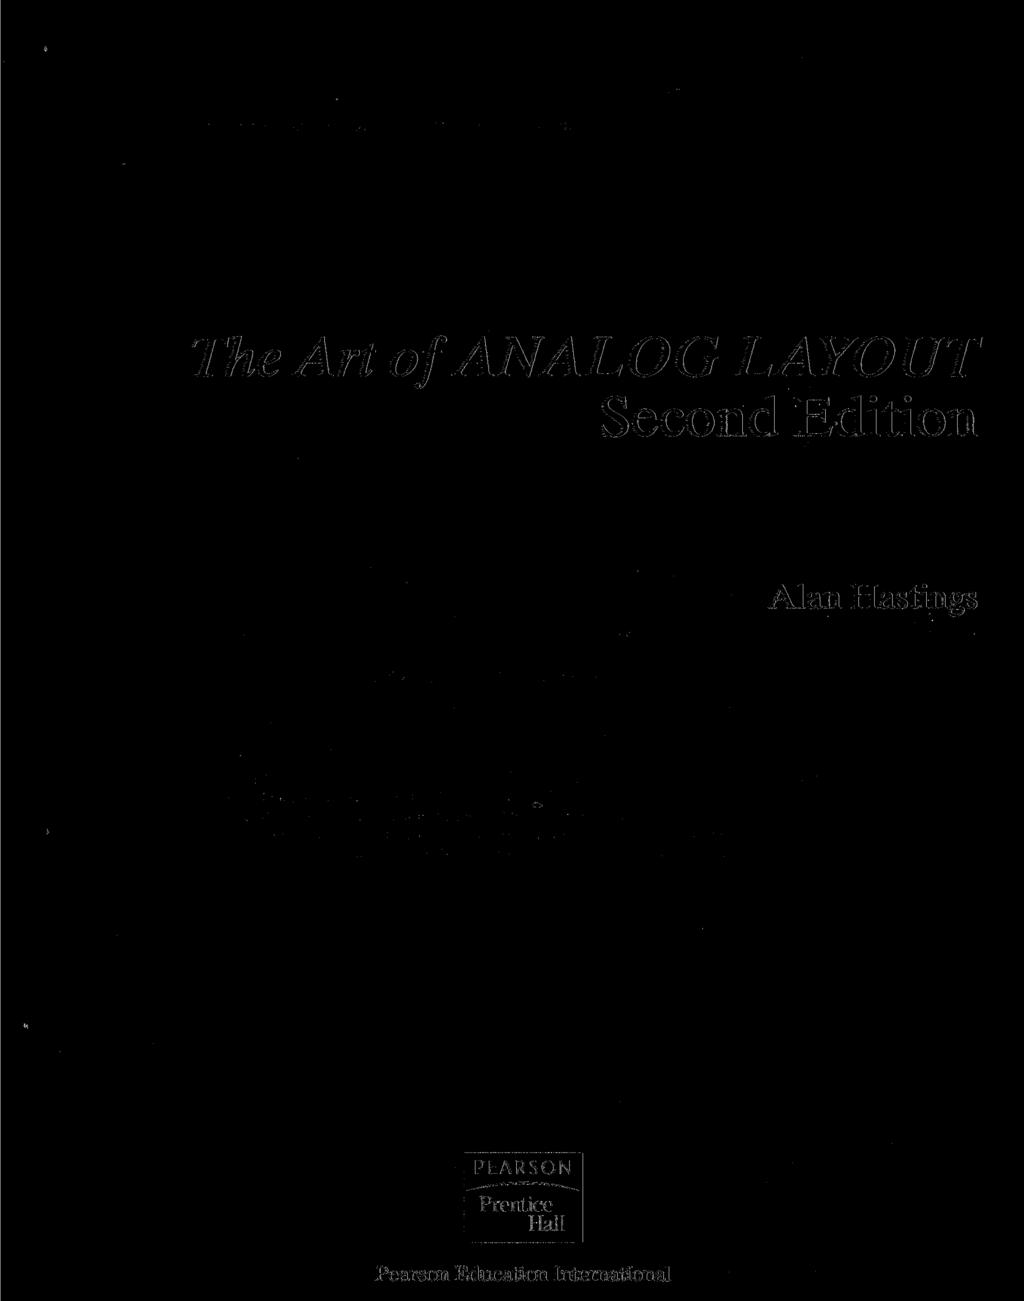 The Art of ANALOG LAYOUT Second Edition Alan